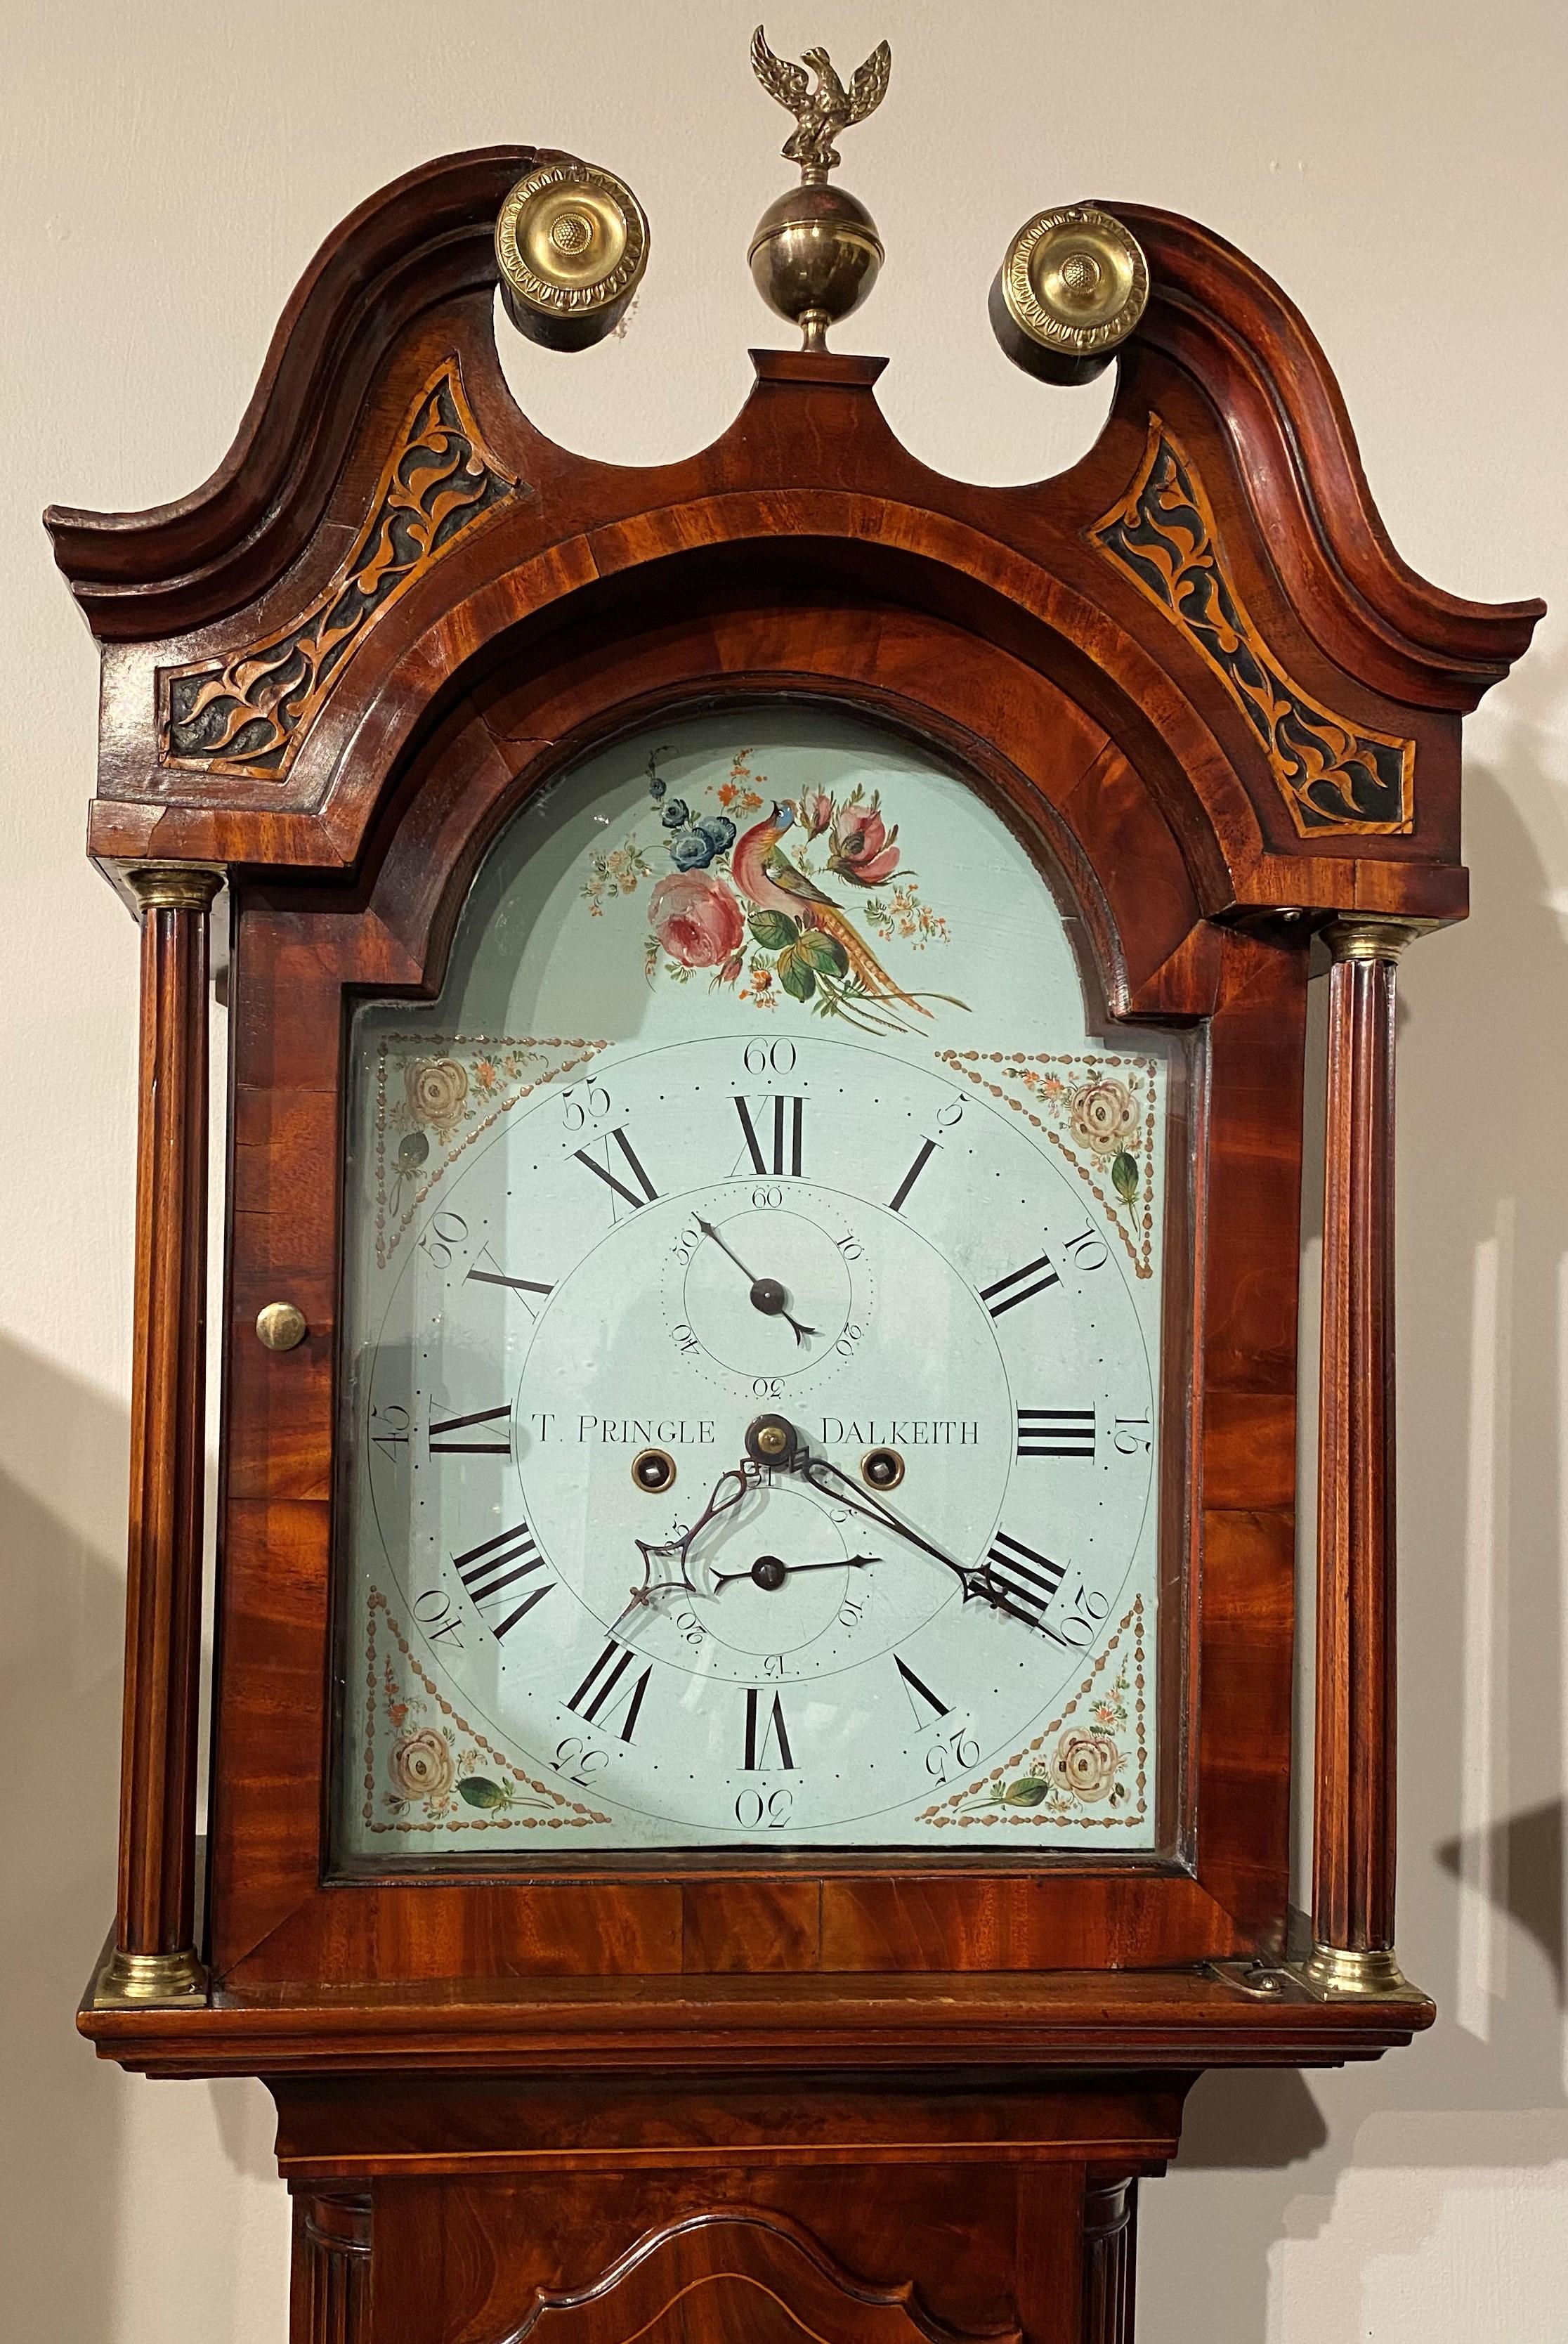 A fine example of an 8-day tall clock in mahogany case made by Thomas Pringle, Scottish clockmaker, active 1830-1836. This beautiful tall case clock features a swan’s neck split pediment with foliate carved decoration, gilt foliate rosettes, and a